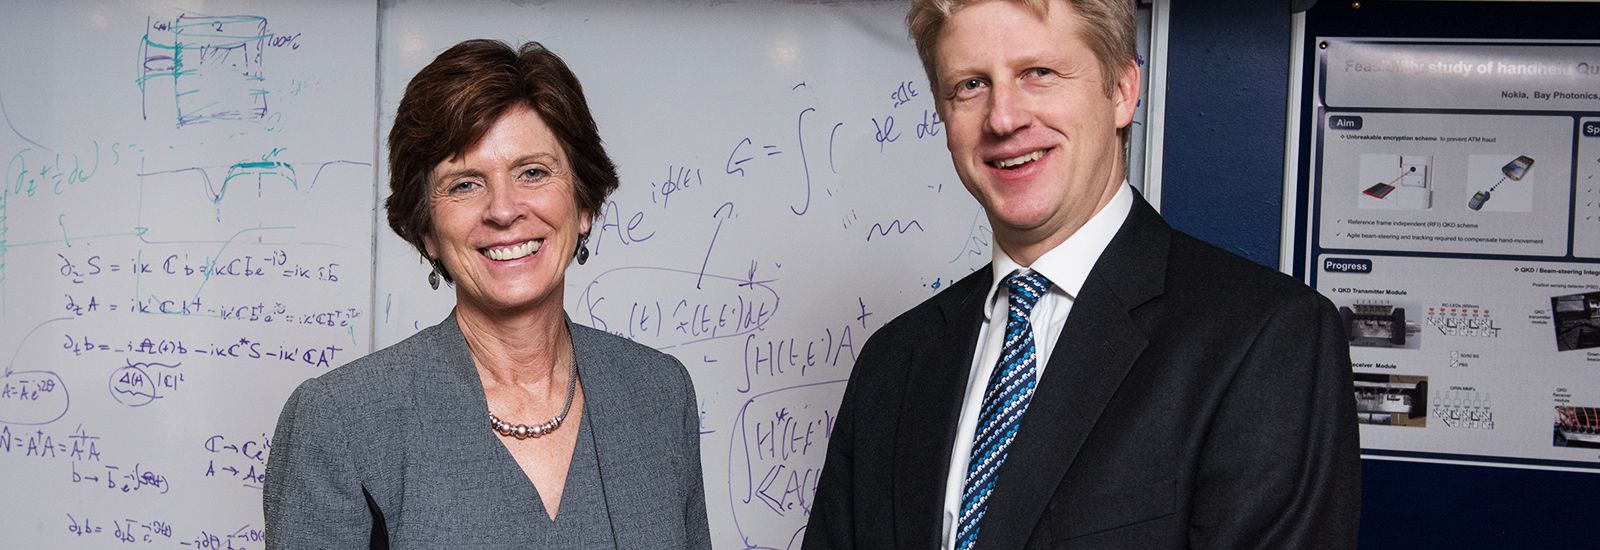 Oxford’s Vice-Chancellor, Professor Louise Richardson, with the Universities and Science Minister, Jo Johnson